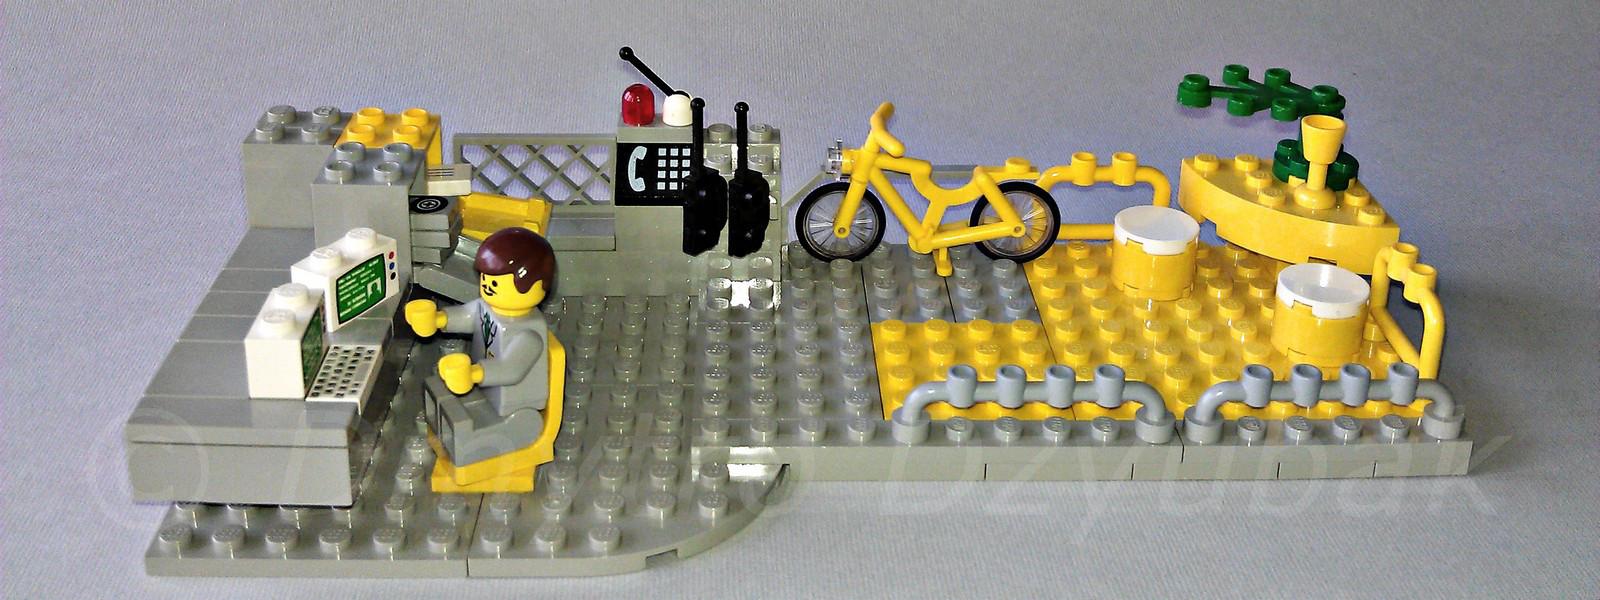 Lego Office, one person